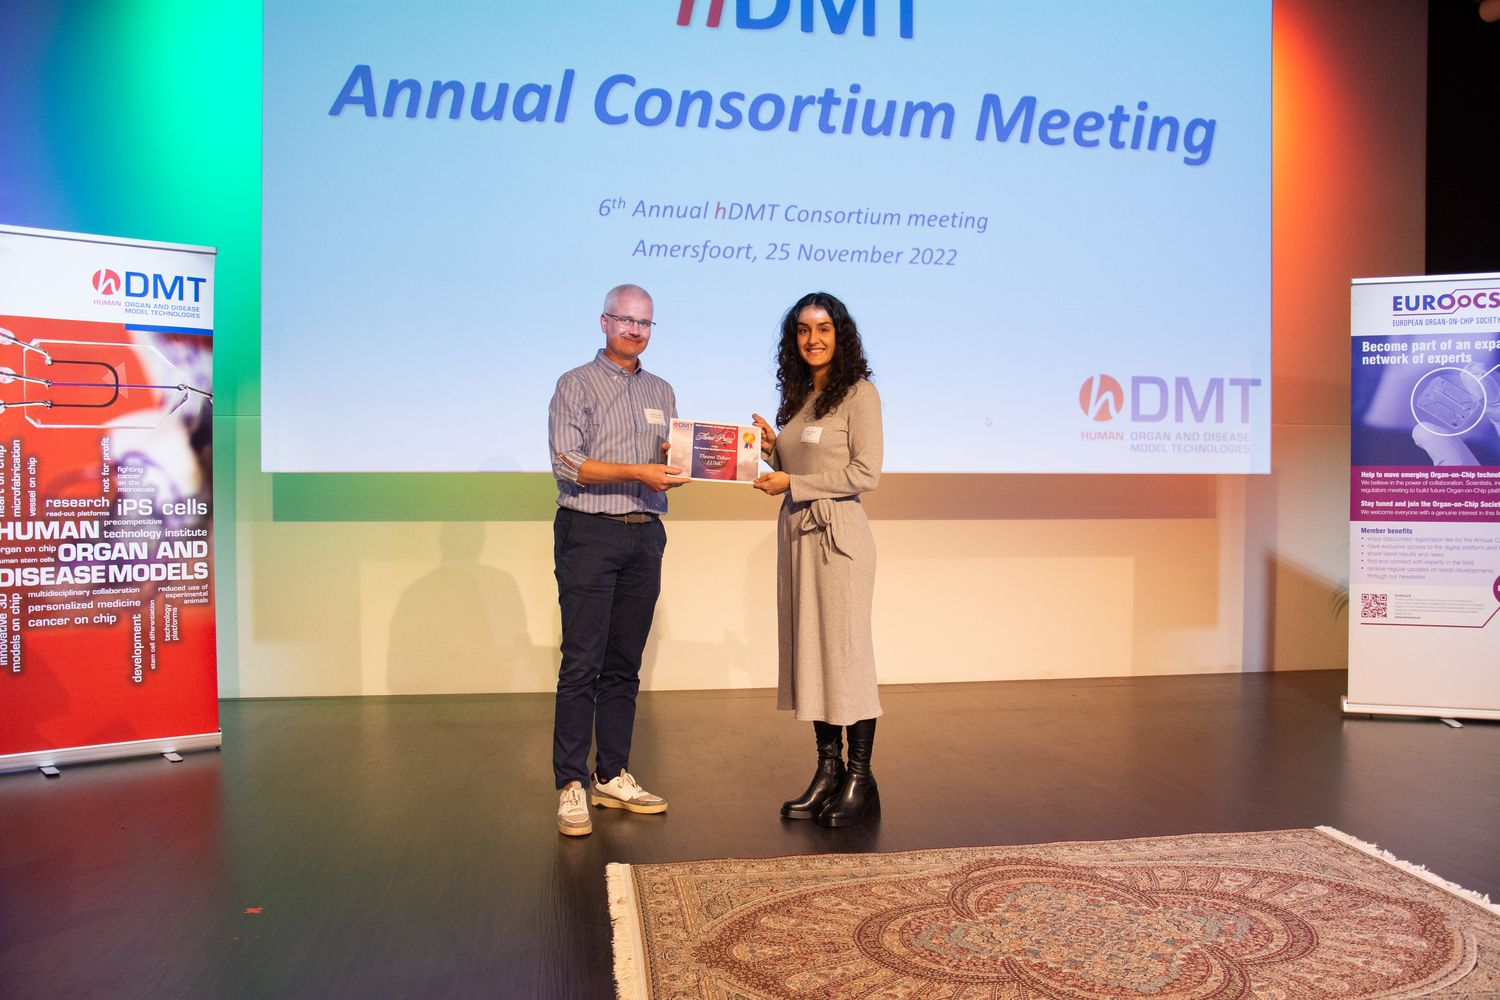 3rd prize for Theano Tsikaro of LymphChip at hDMT meeting